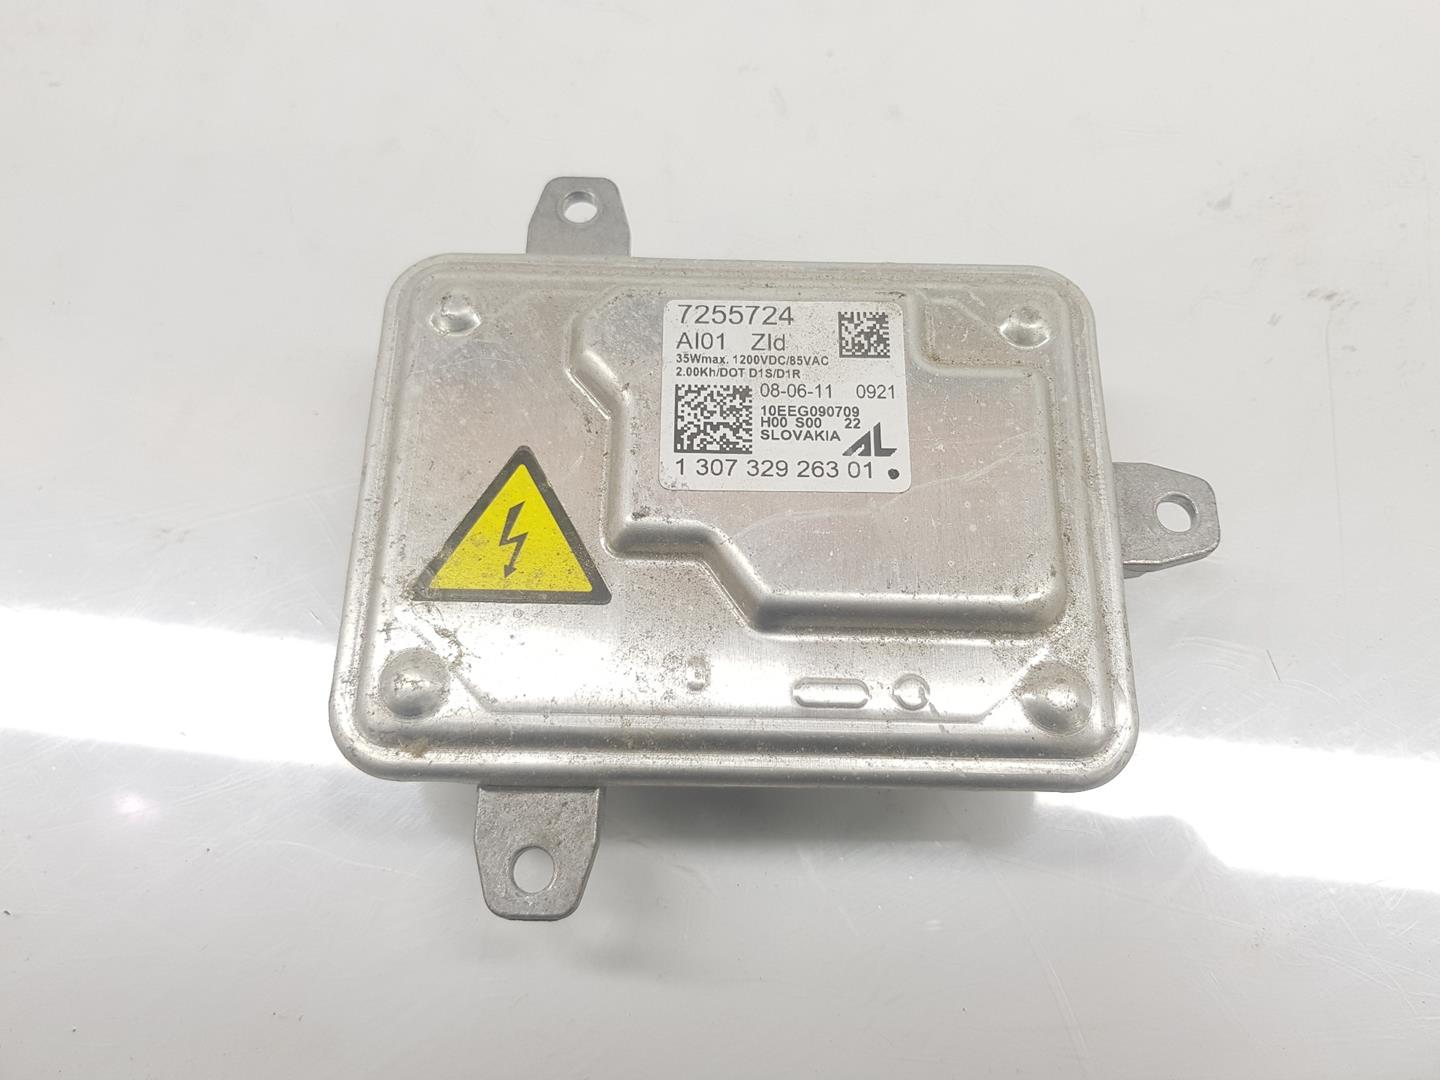 BMW X5 E70 (2006-2013) Other Control Units 63127255724, 7255724 24144112